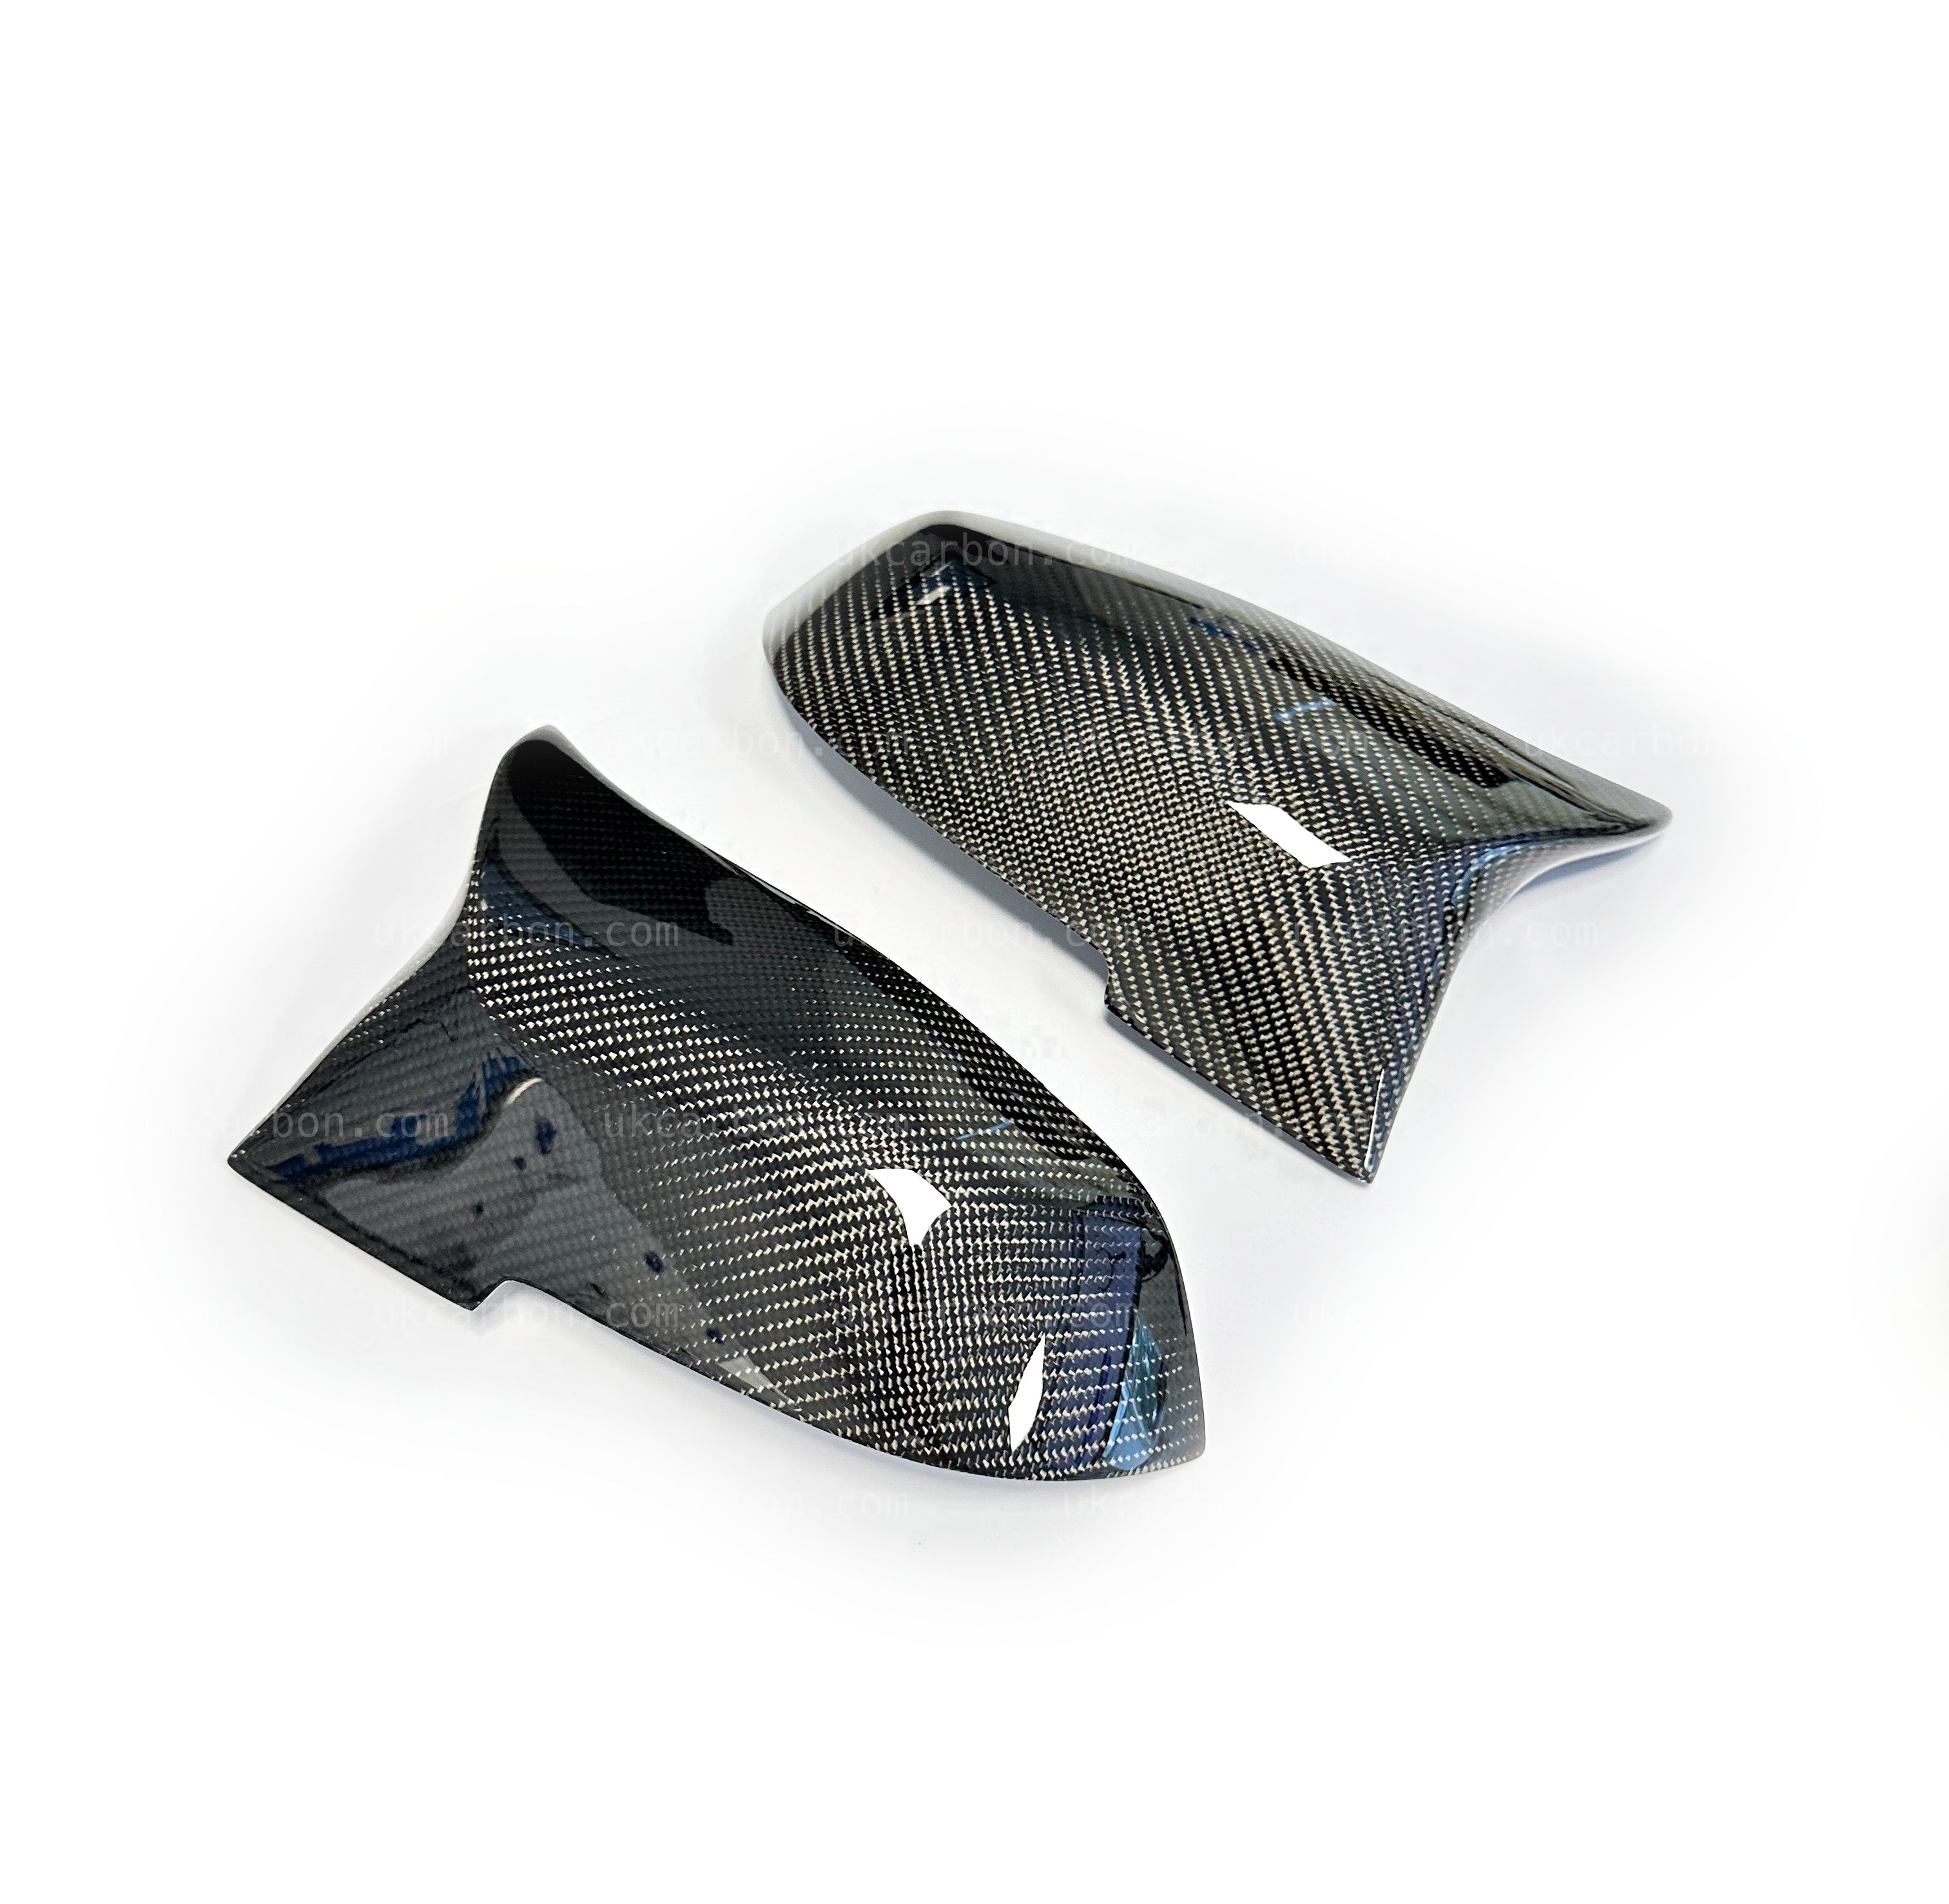 BMW 4 Series Carbon M Style Wing Mirror Cover M Performance F32 F36 by UKCarbon